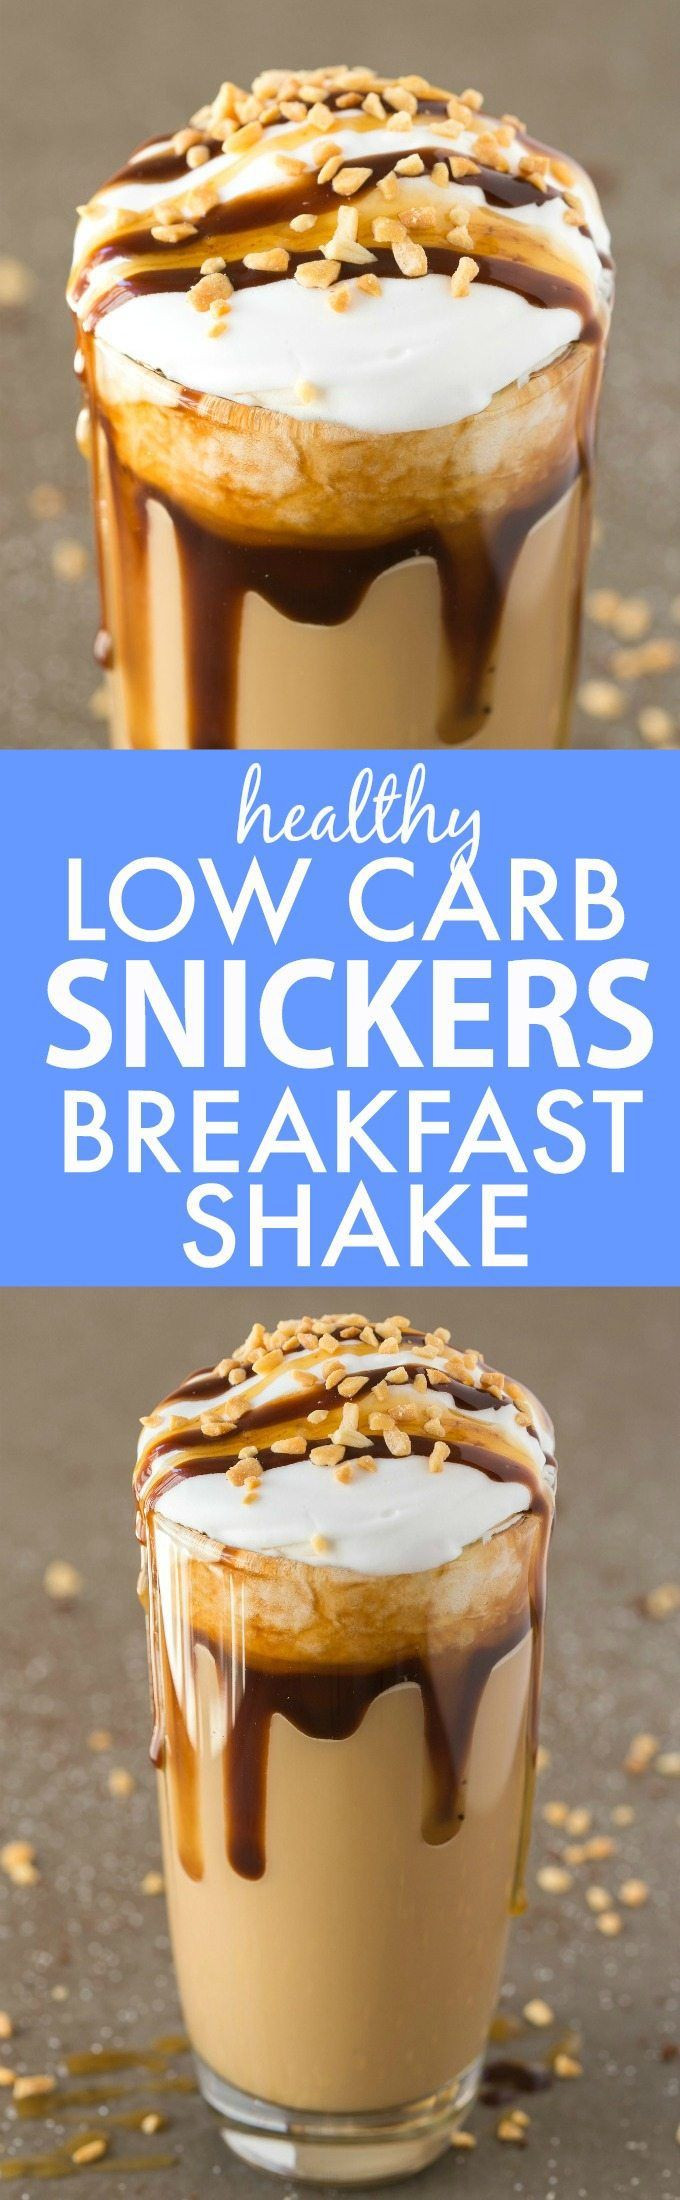 Low Carb Protein Shake Recipes For Weight Loss
 Healthy Low Carb Snickers Breakfast Shake